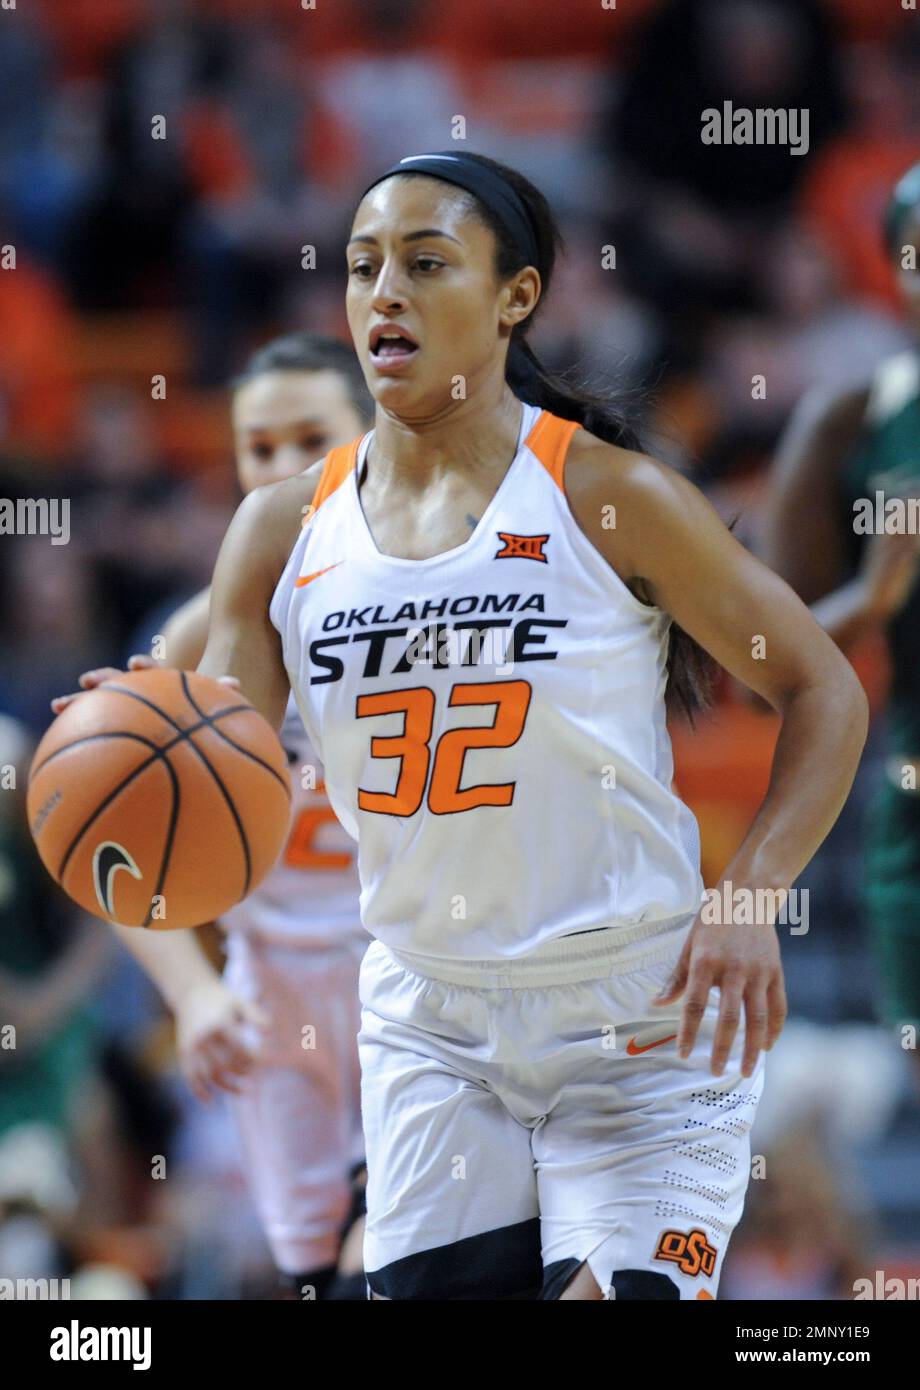 Oklahoma State guard Loryn Goodwin advances the ball during a NCAA ...